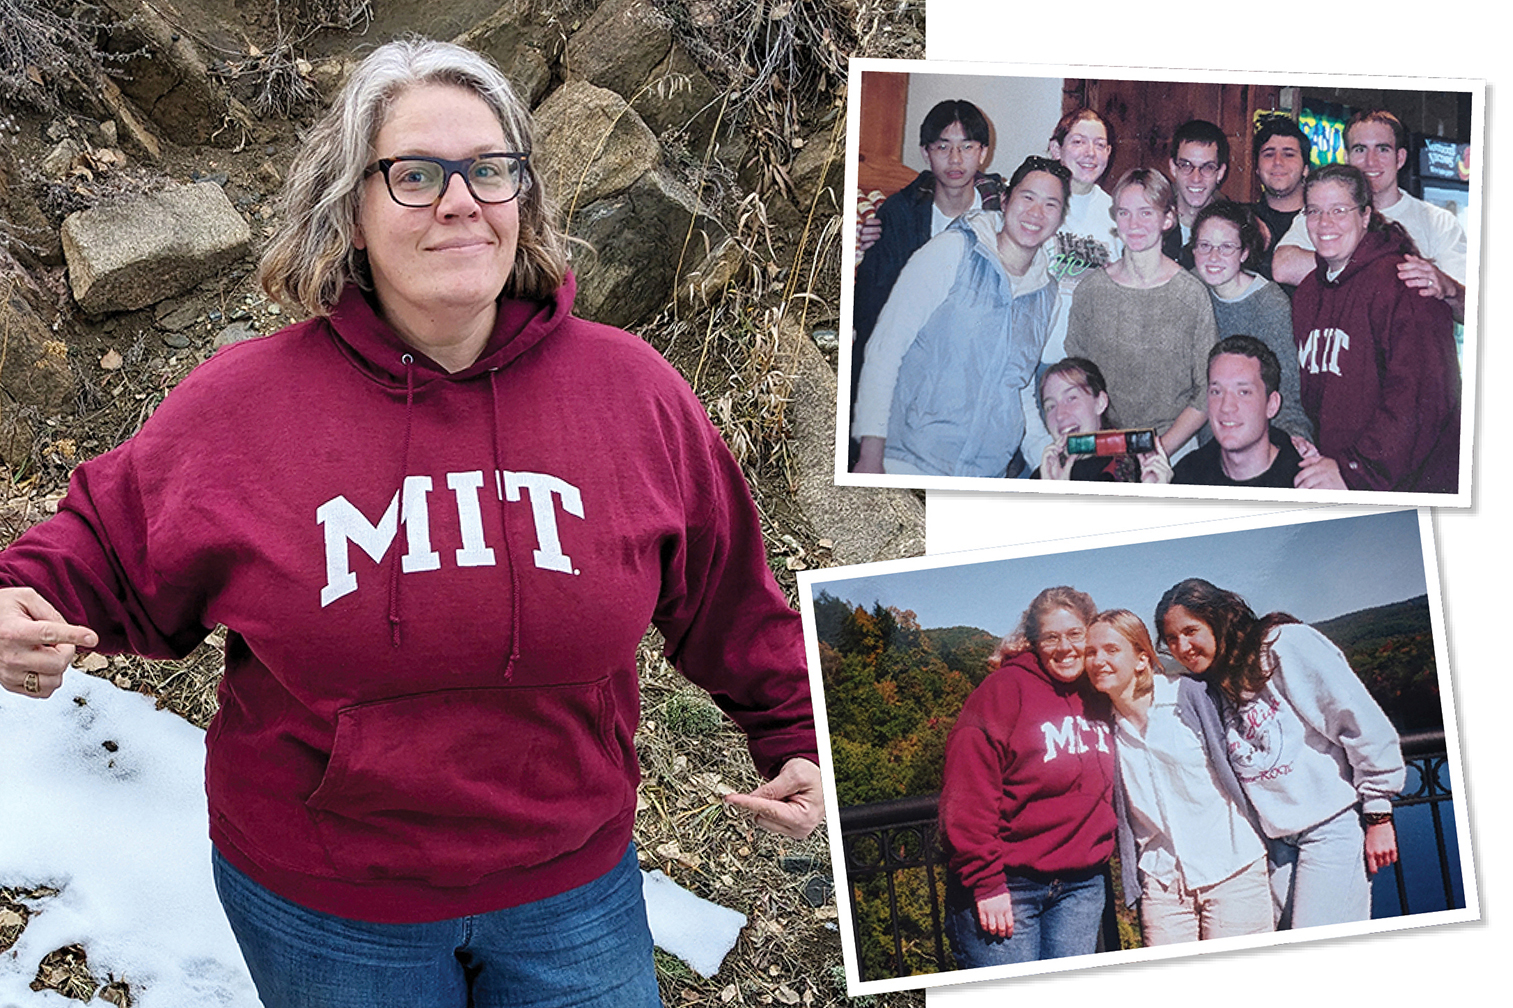 A photo collage of photos of MIT alum Amy (Schonsheck) Simpkins all three showing her wearing an MIT sweatshirt, one by herself, one with two other people, and another in a large group